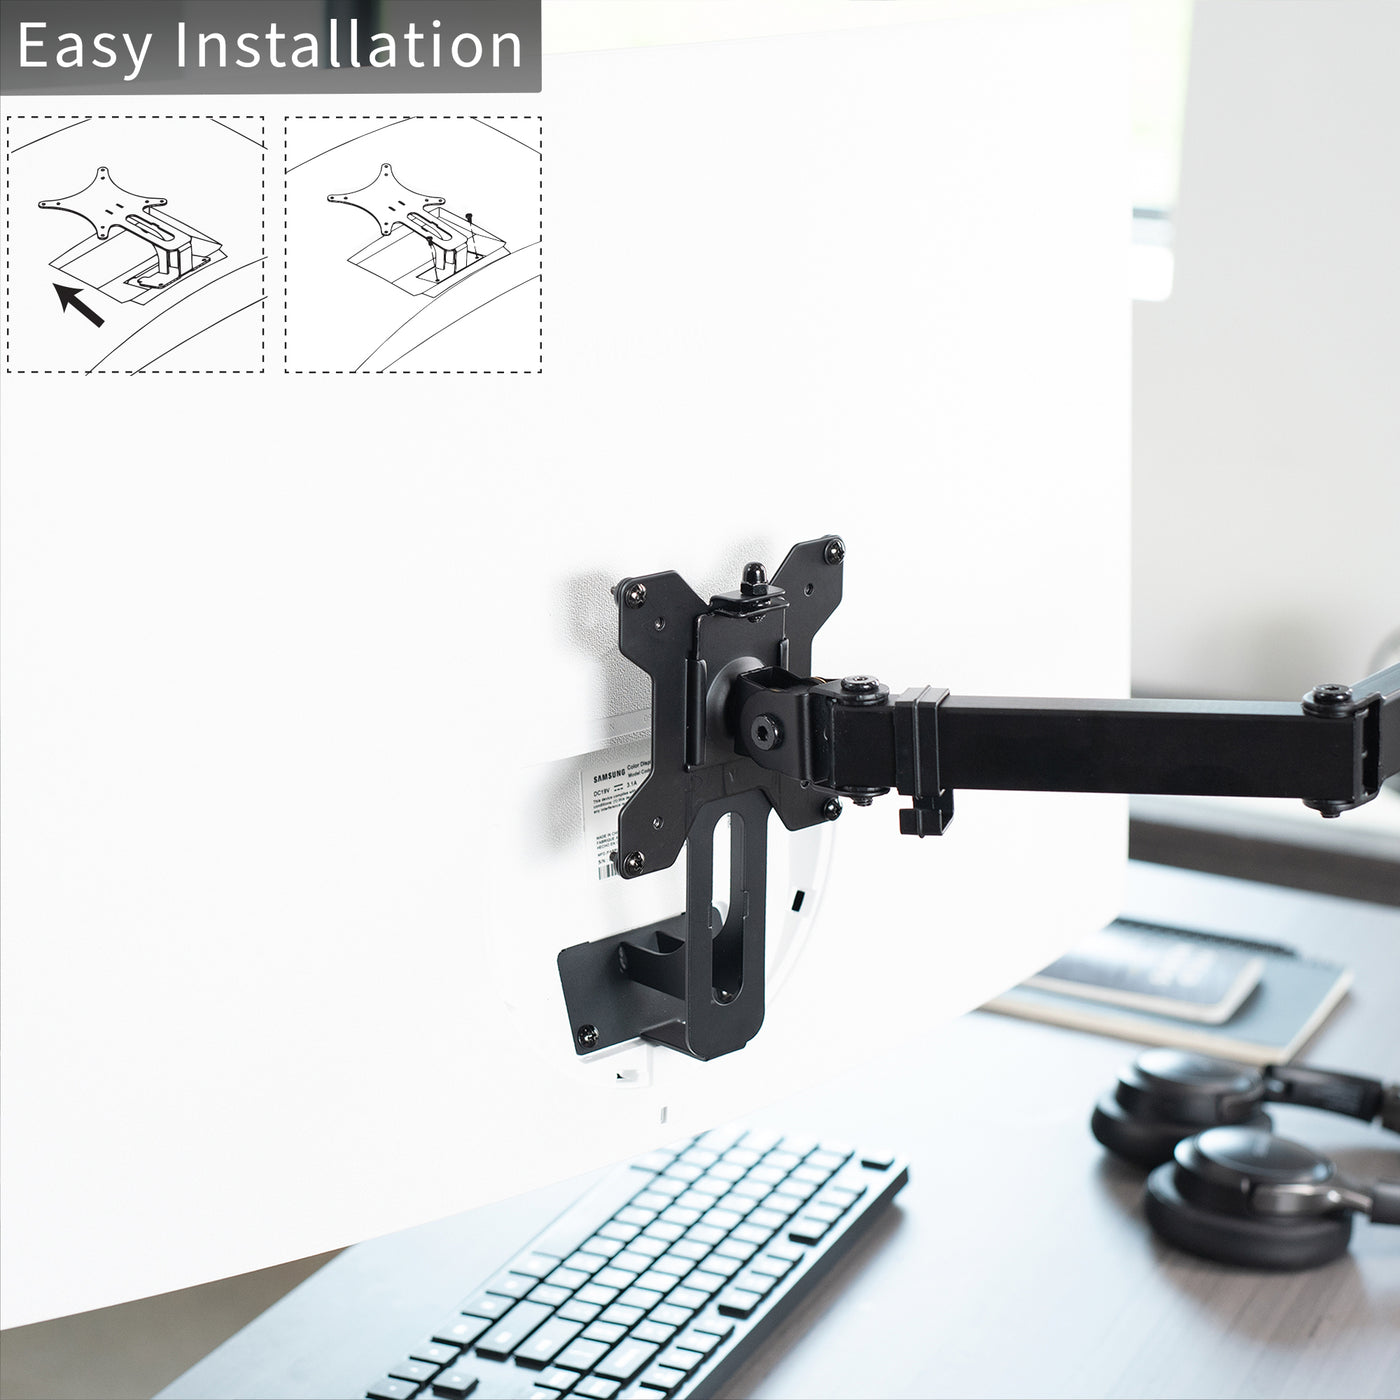 VESA Adapter Designed for the Compatible Samsung UR591C Series allows your non VESA compatible monitor to be mounted to a stand of your choice with easy installation.